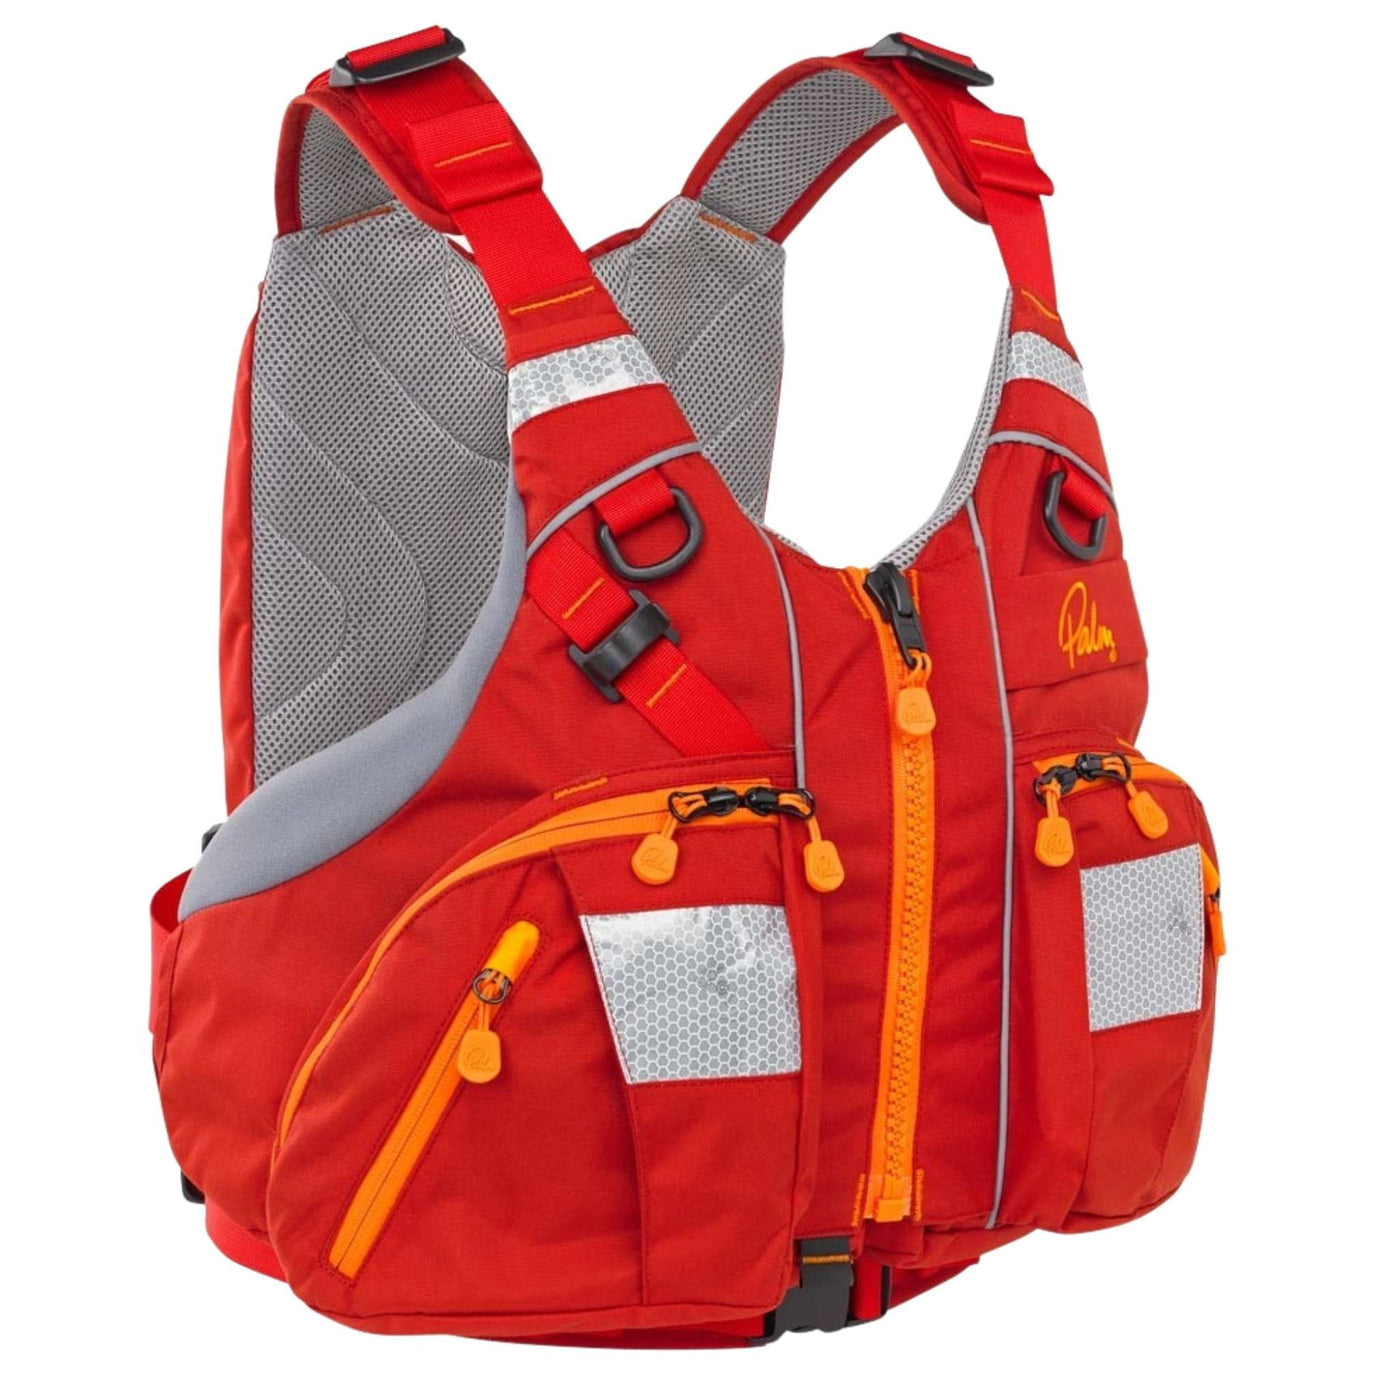 Palm Kaikoura PFD | Kayaking and Rafting PFD | Further Faster Christchurch NZ #red